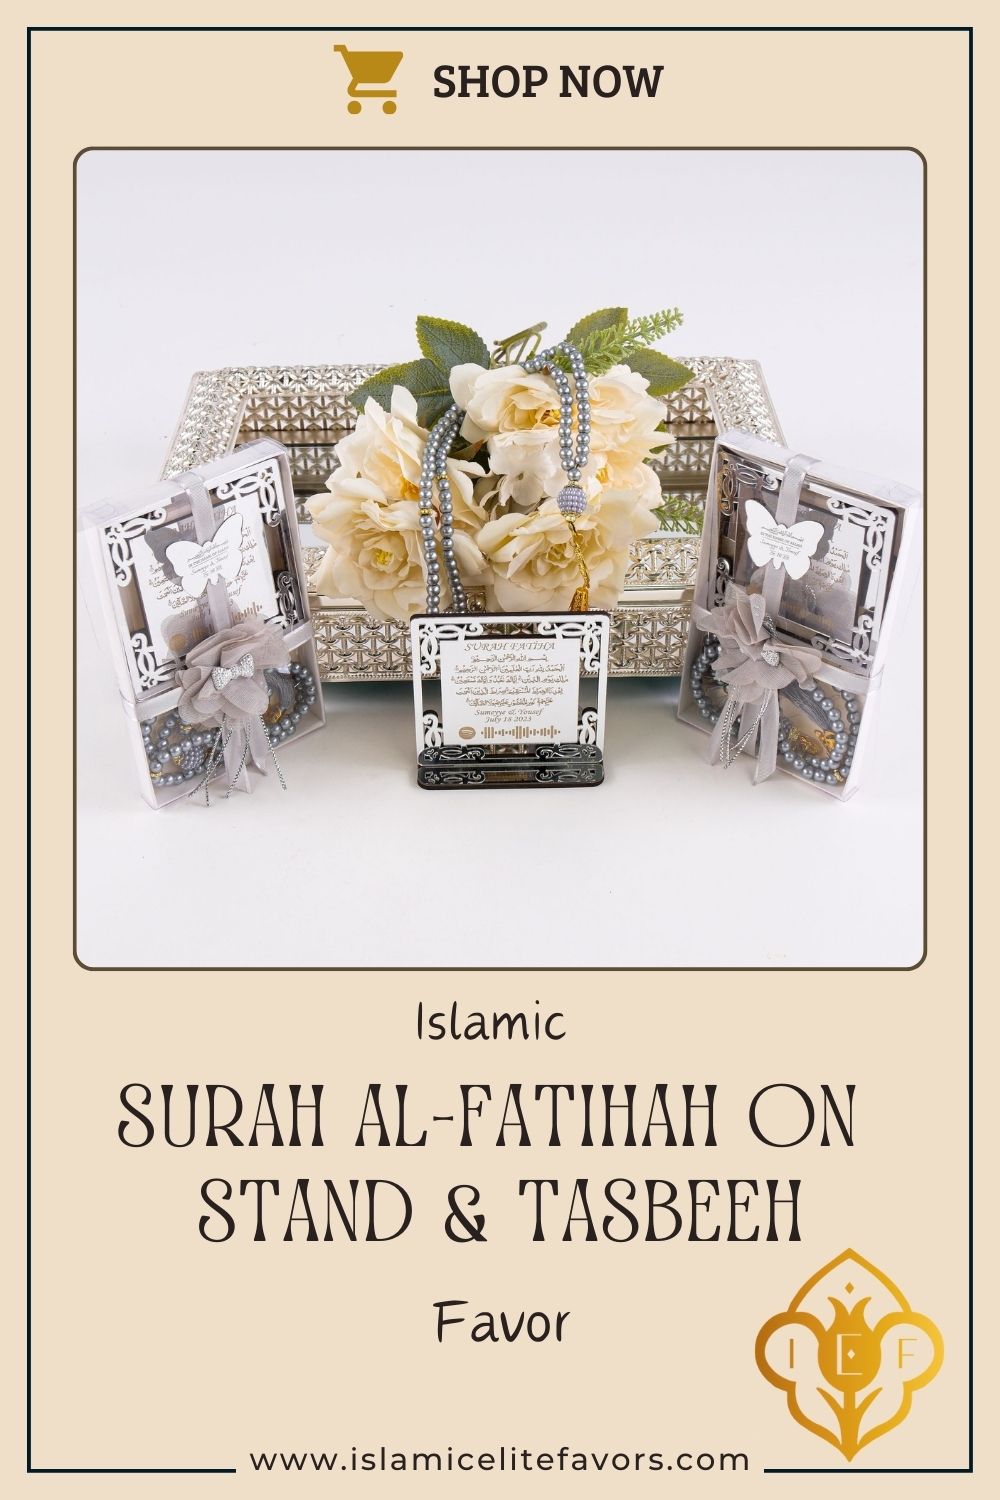 Personalized Surah Al-Fatihah on Stand & Tasbeeh Islamic Wedding Favor - Islamic Elite Favors is a handmade gift shop offering a wide variety of unique and personalized gifts for all occasions. Whether you're looking for the perfect Ramadan, Eid, Hajj, wedding gift or something special for a birthday, baby shower or anniversary, we have something for everyone. High quality, made with love.